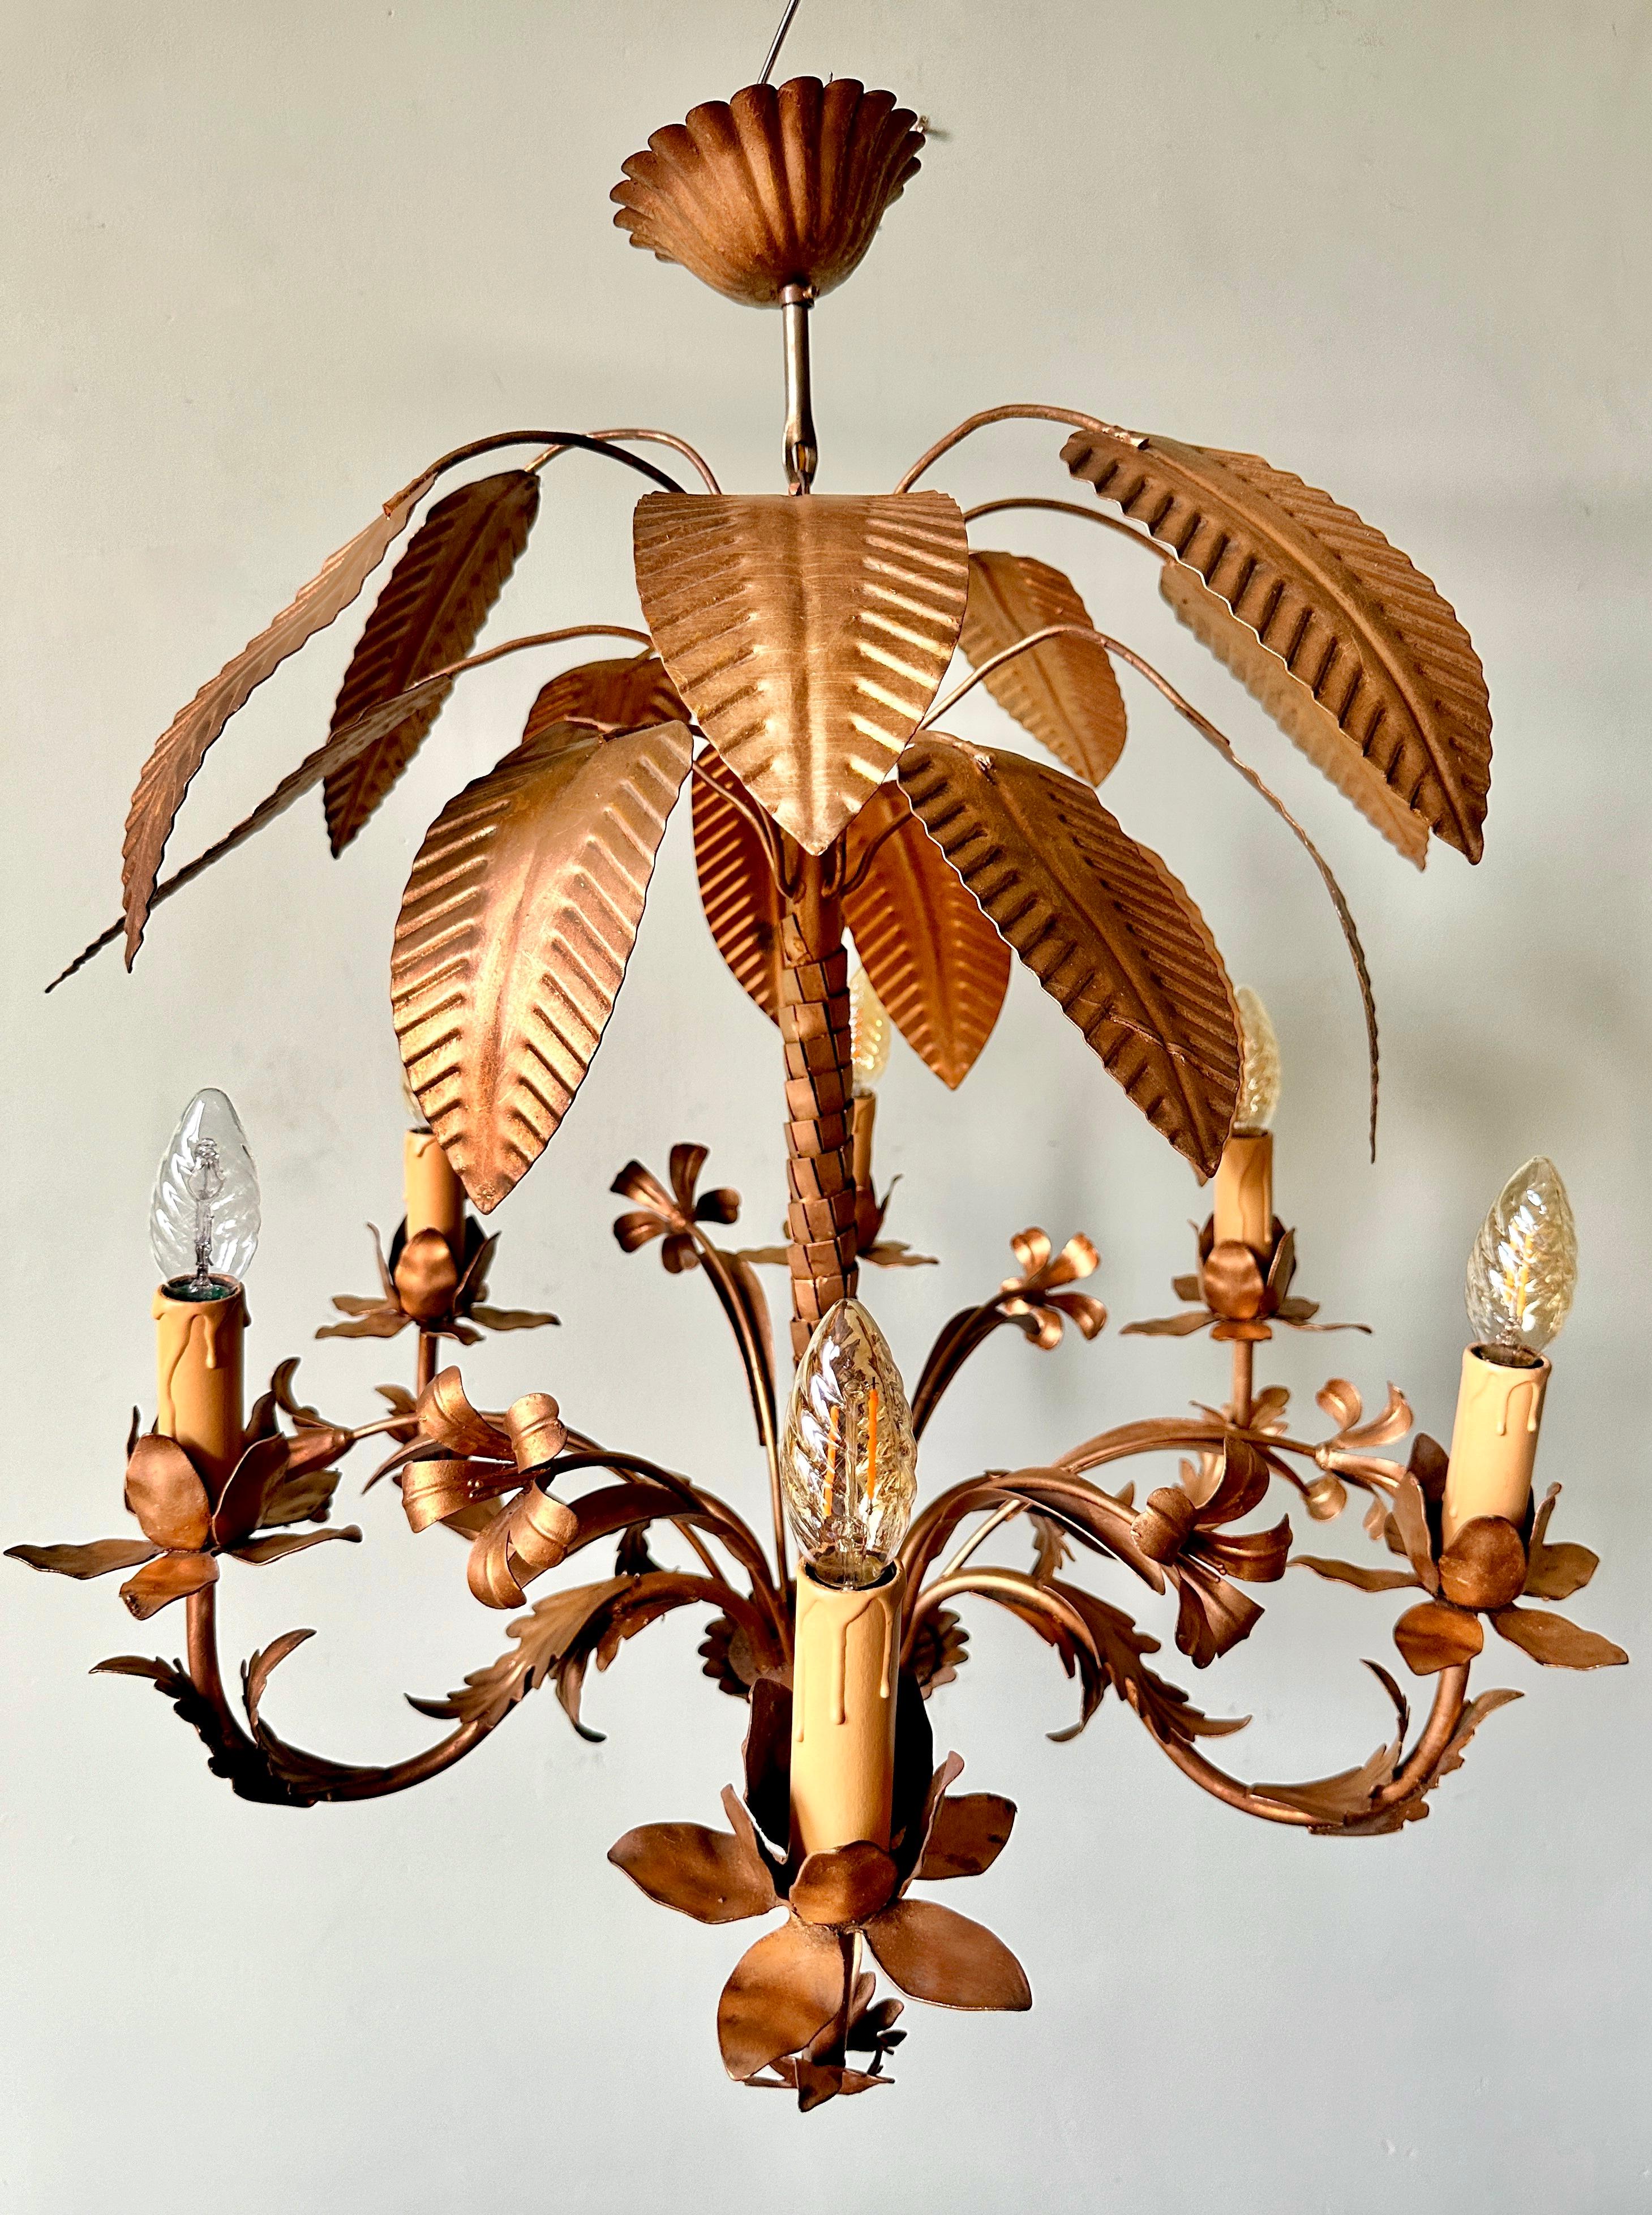 1960s French palm tole chandelier.

Beautiful hand-painted, six-arm ceiling light in the style of Parisian design house Maison Jansen. In excellent condition with light and attractive wear. A surface mark on one leaf (see photos). The chandelier has